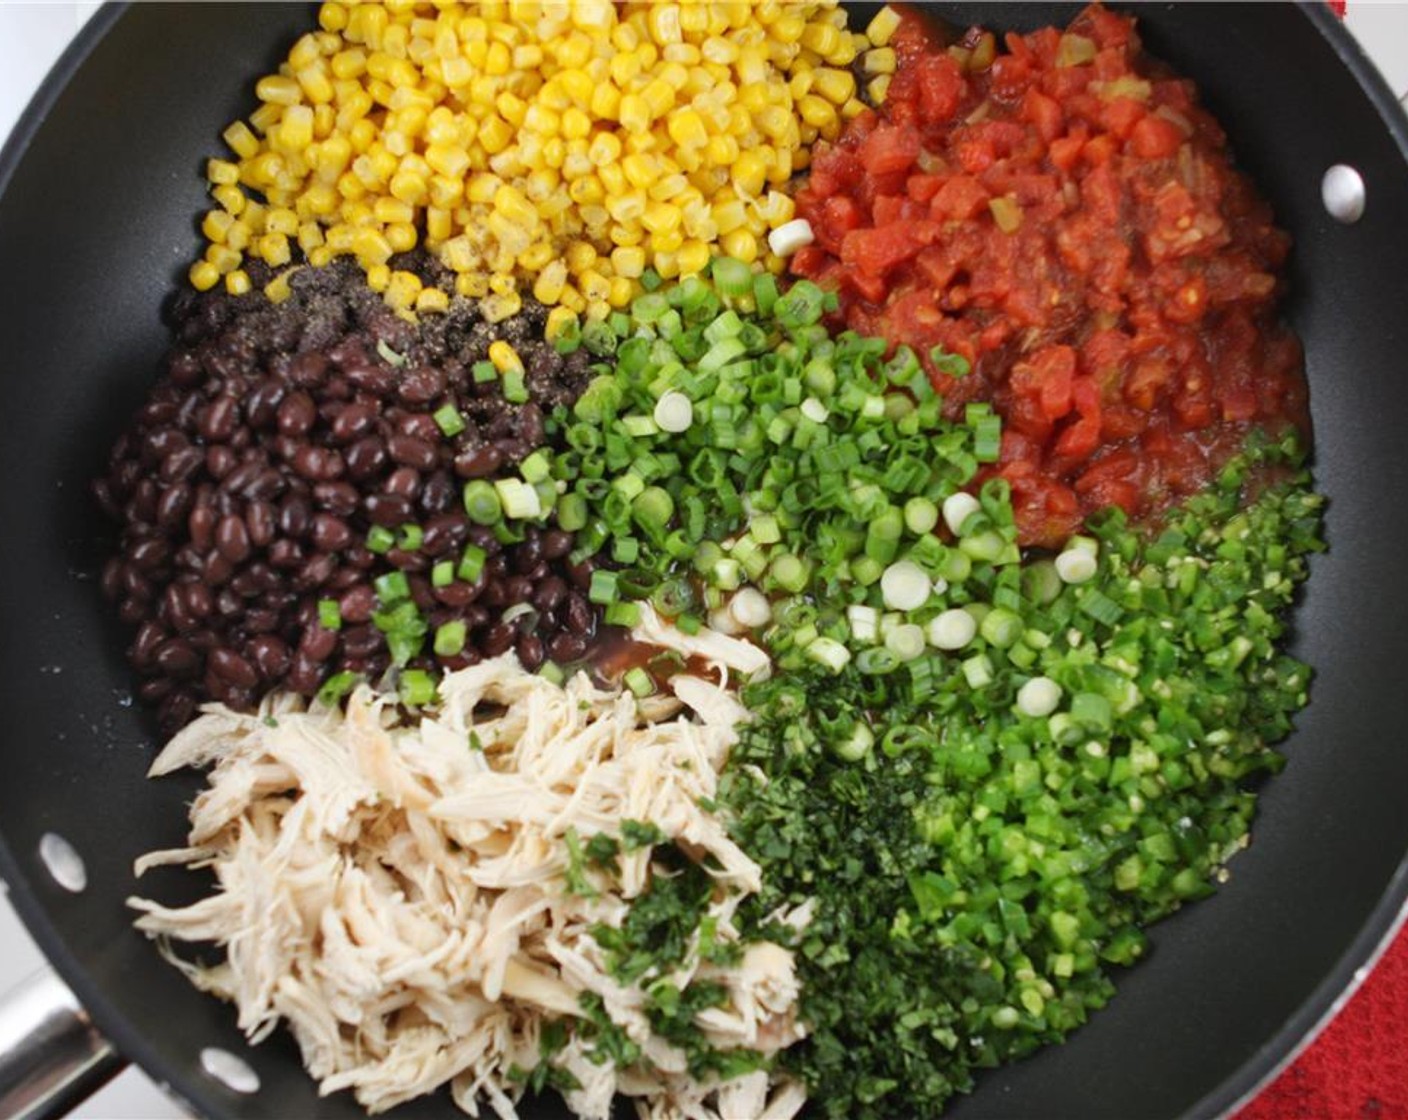 step 4 Add the Chicken (1 cup), Corn (1 can), Black Beans (1 can), Diced Tomatoes (1 can), Scallion (1 bunch), Fresh Cilantro (1/4 cup), juice from the Lime (1), Salt (to taste), and Ground Black Pepper (to taste) to the skillet. Cook mixture over medium-low heat for about 5 minutes, stirring frequently.